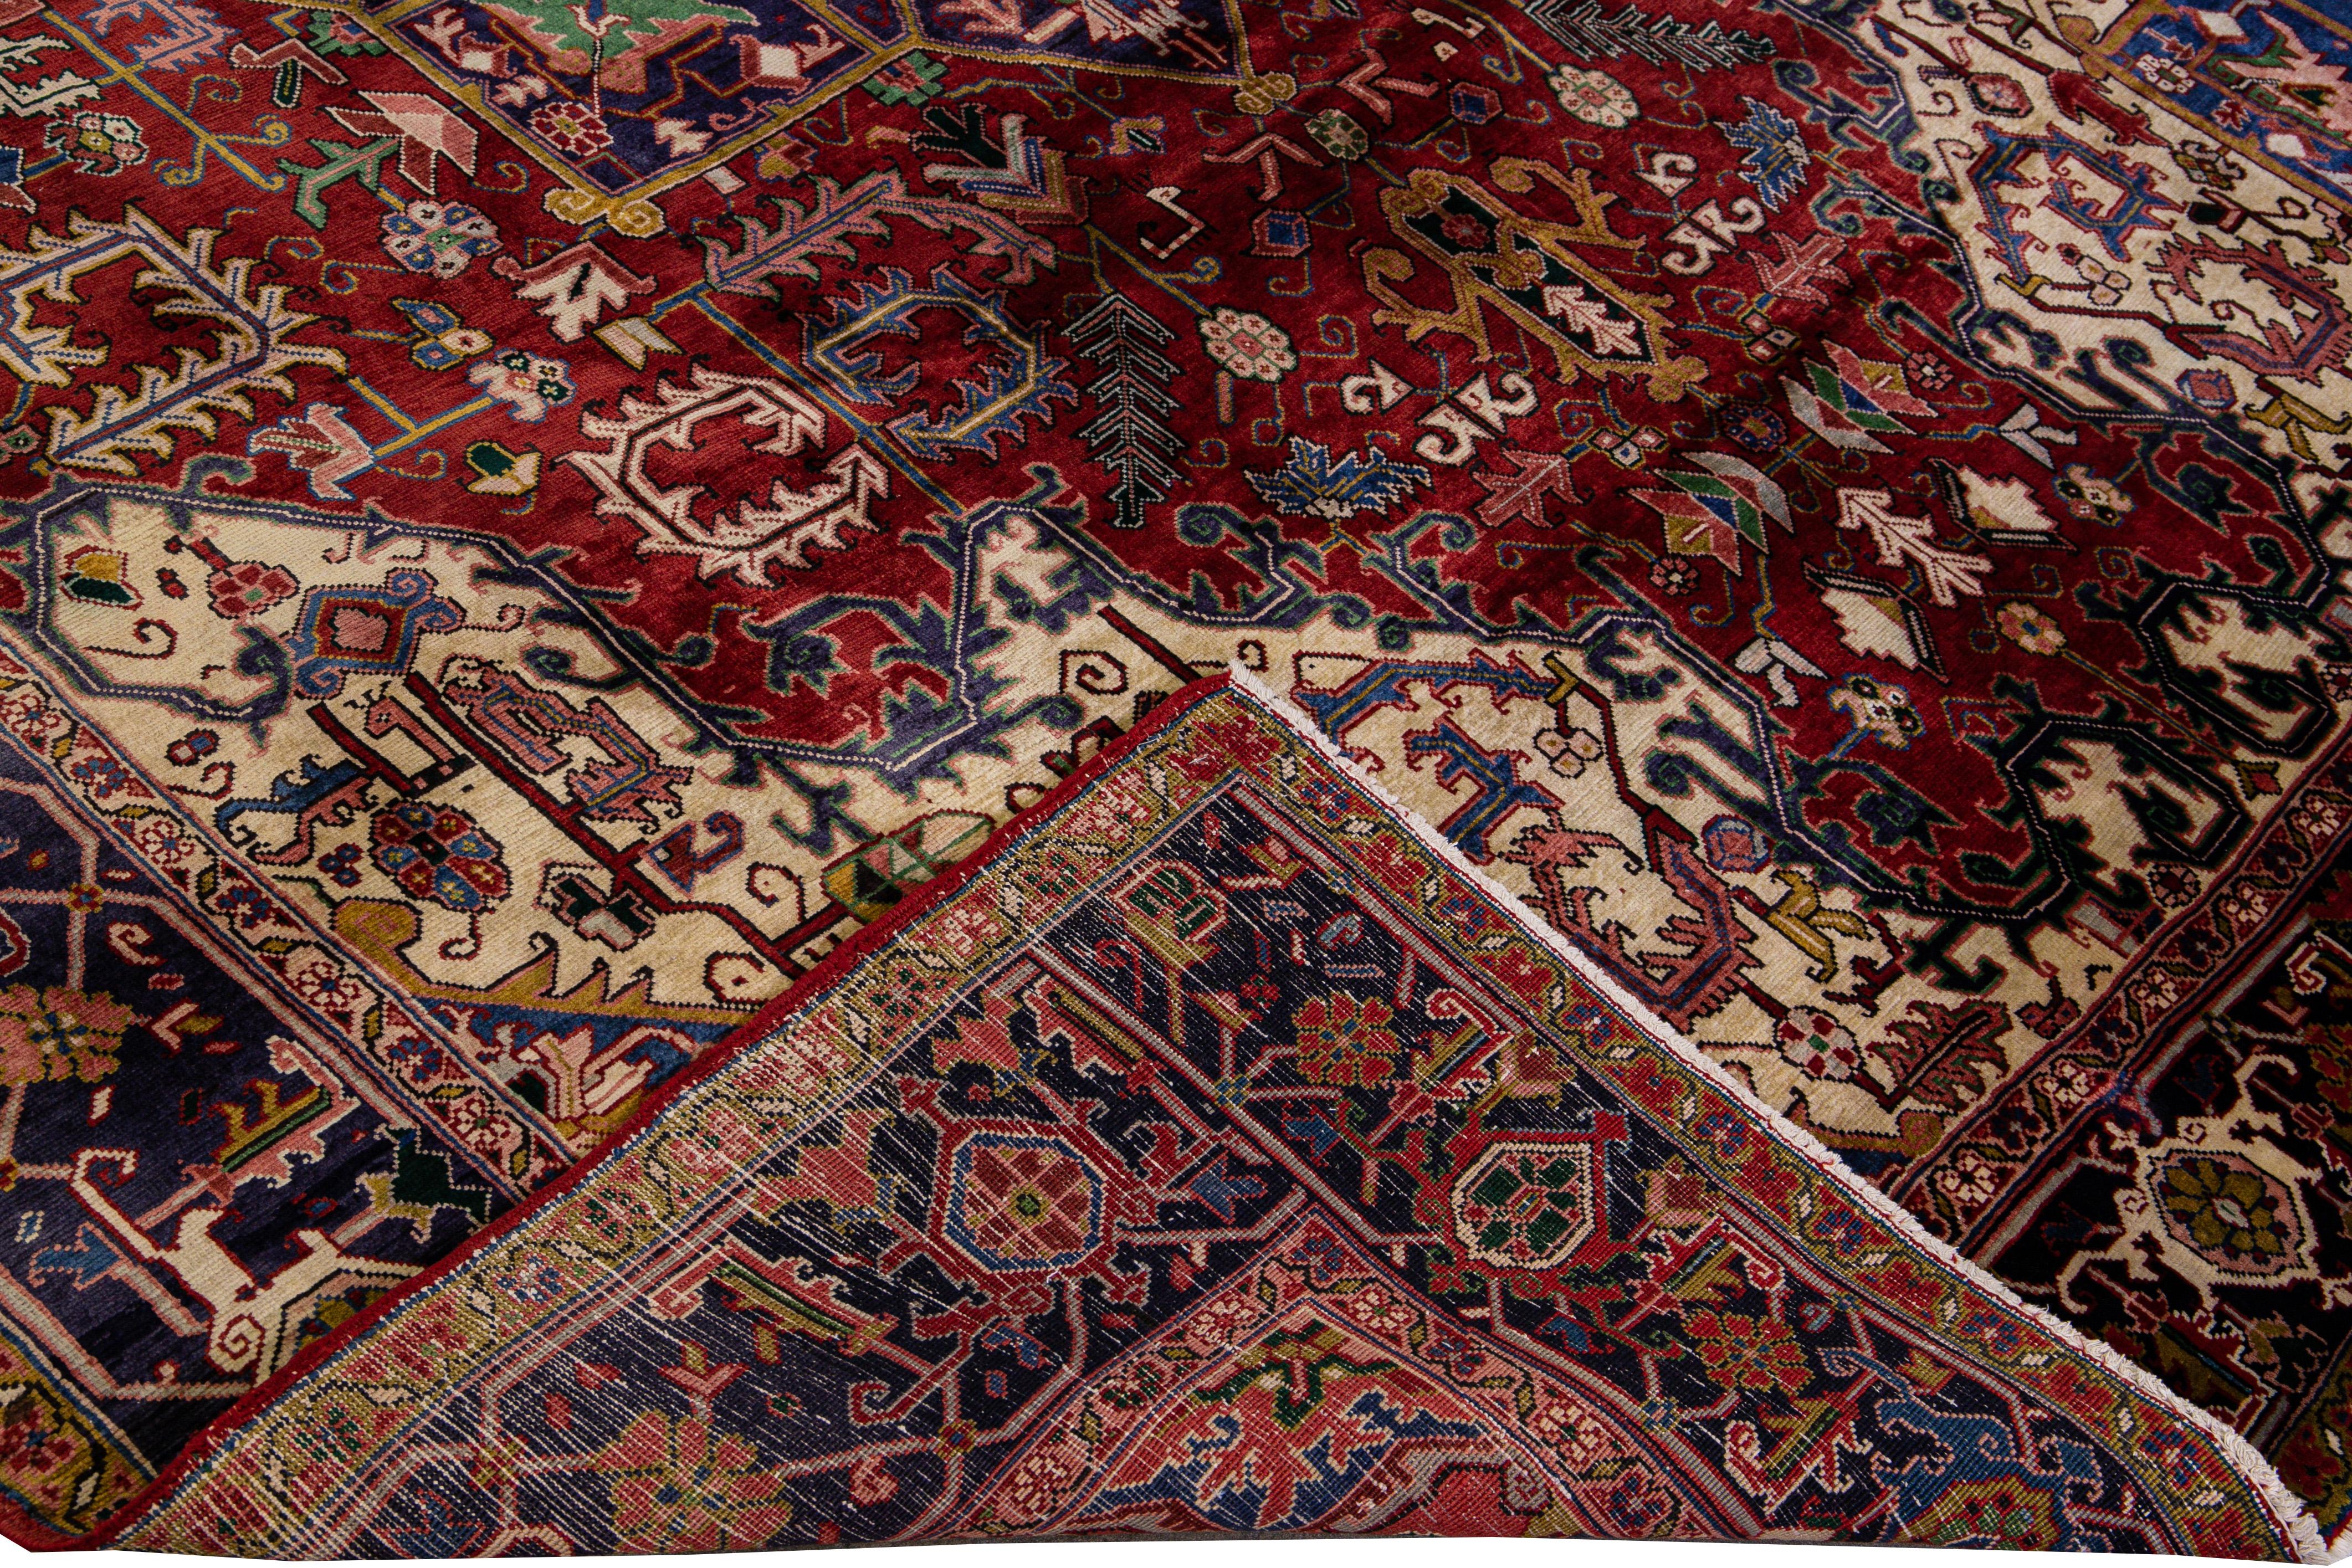 Beautiful vintage fine woven Heriz hand-knotted wool rug with a red field. This Persian rug has a blue-designed frame and multicolor accents in an all-over gorgeous geometric medallion floral motif.

This rug measures: 8'2